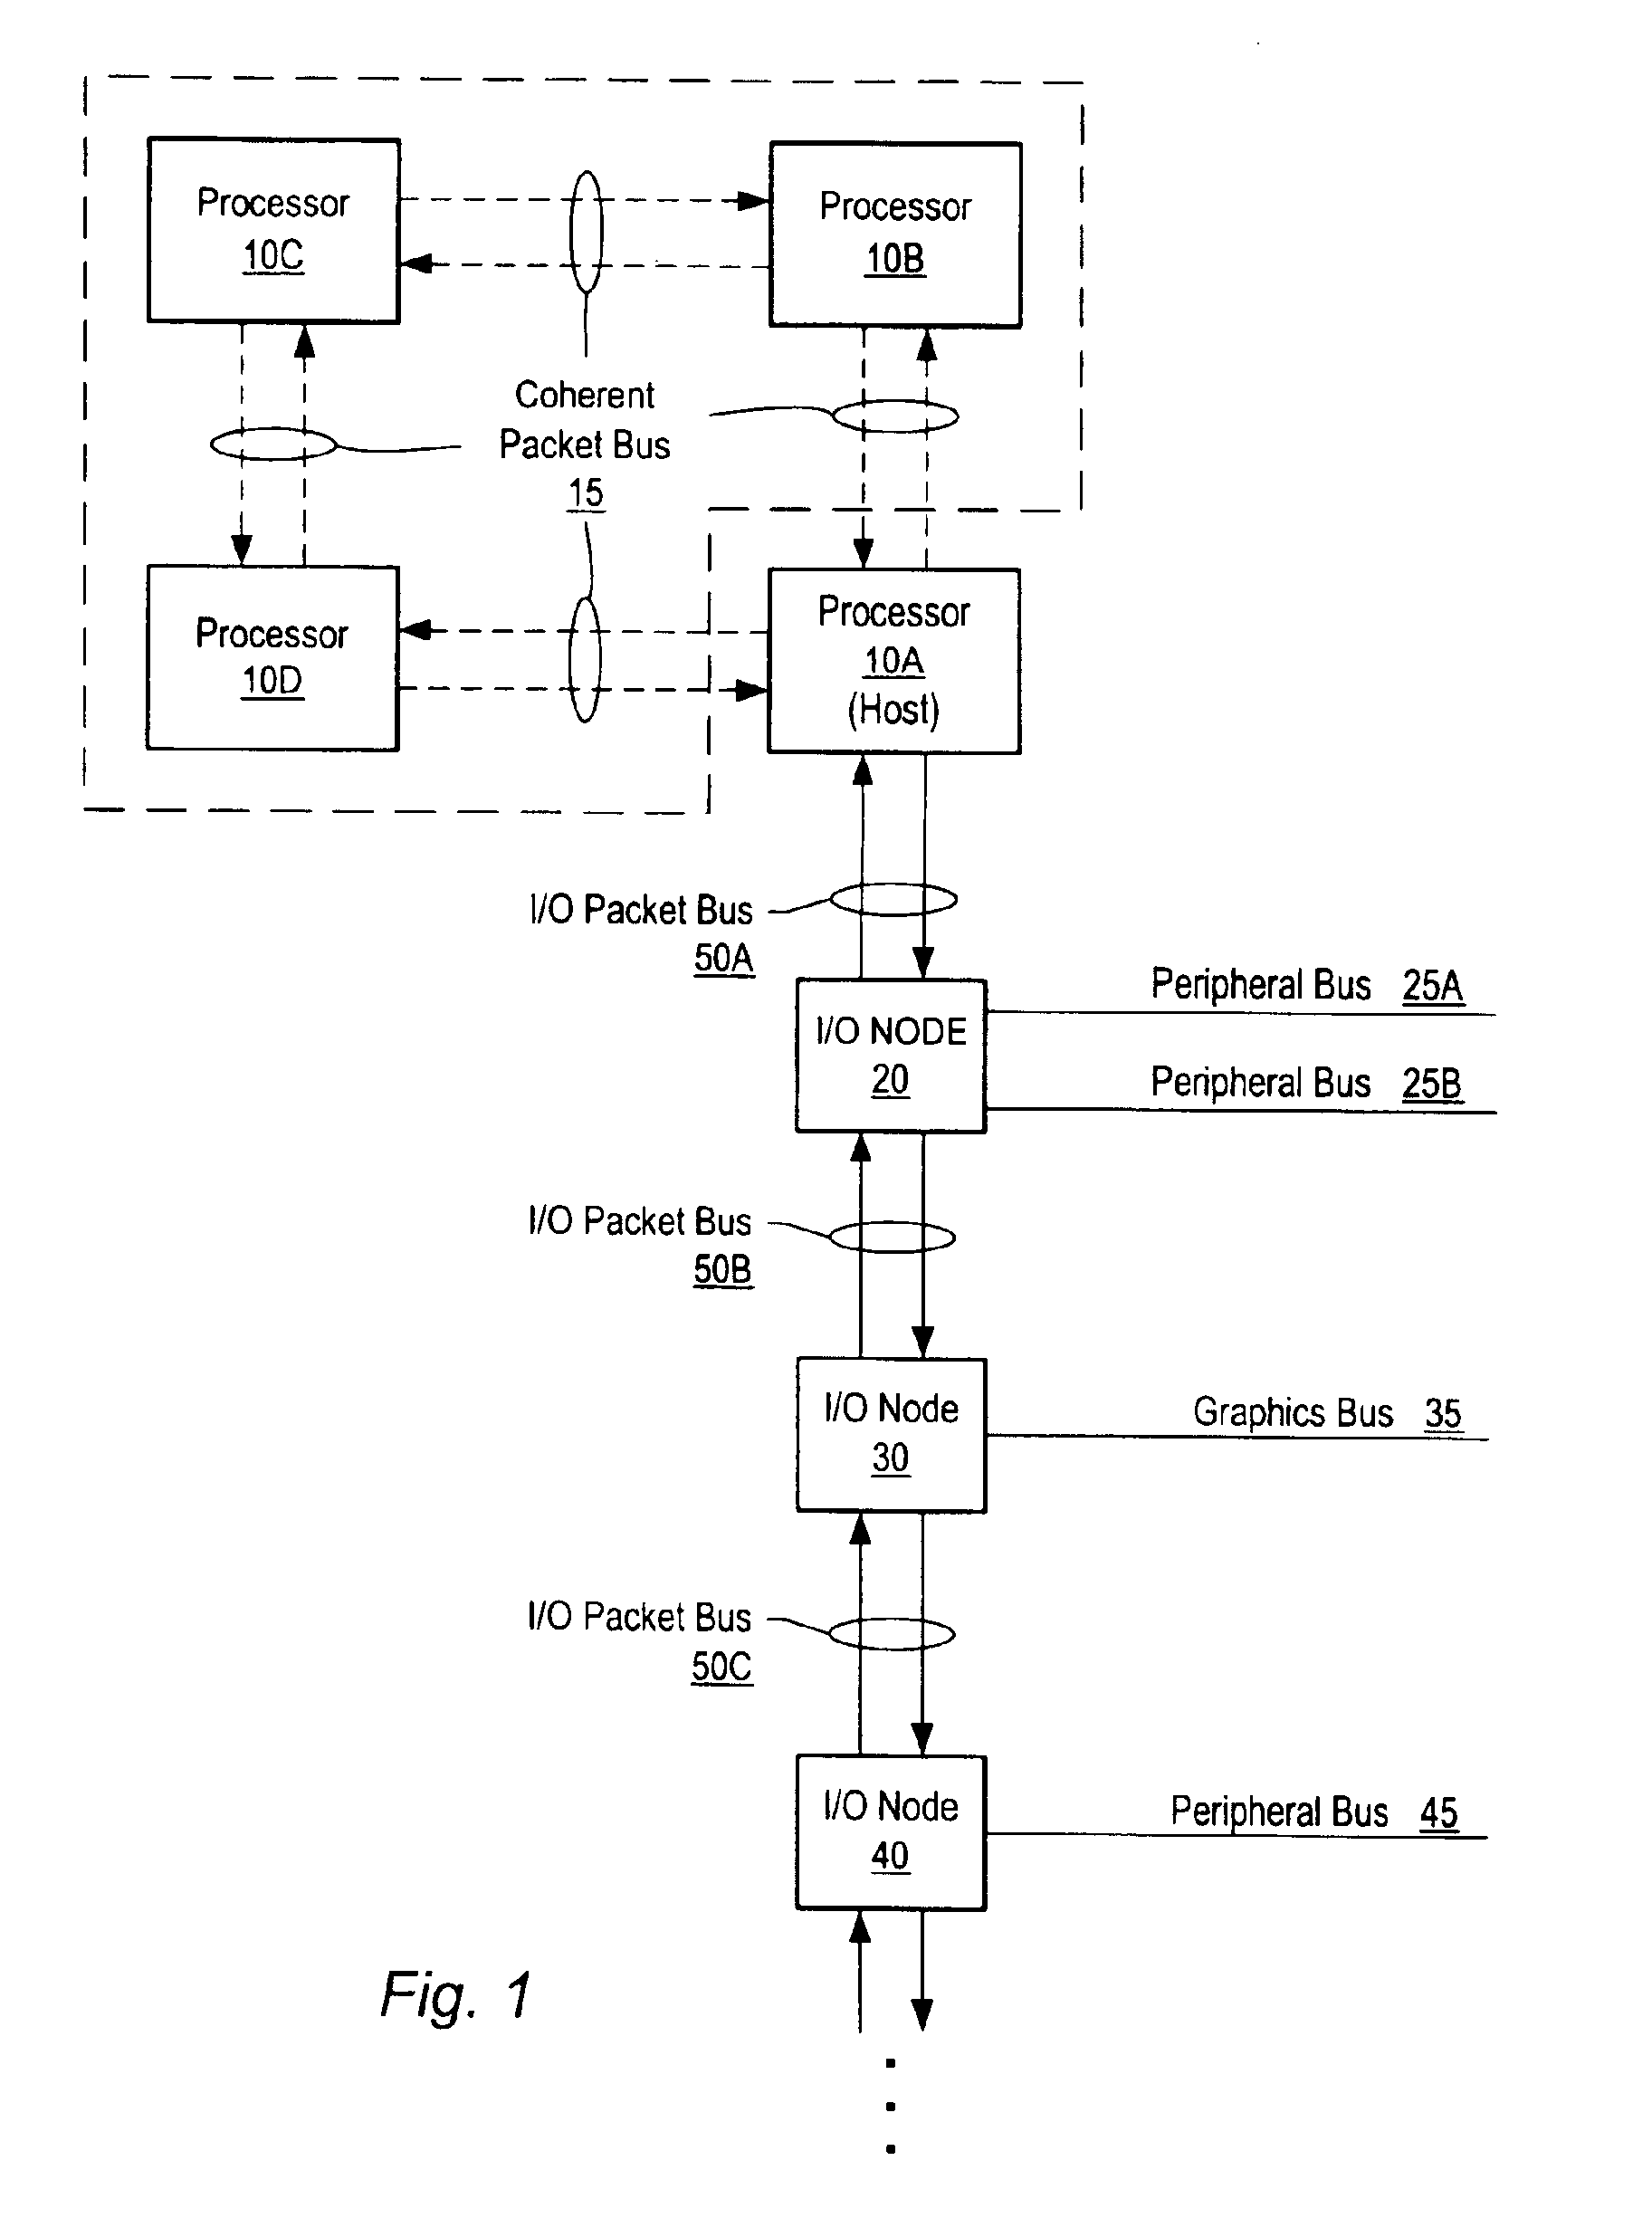 System and method for analyzing bus transactions